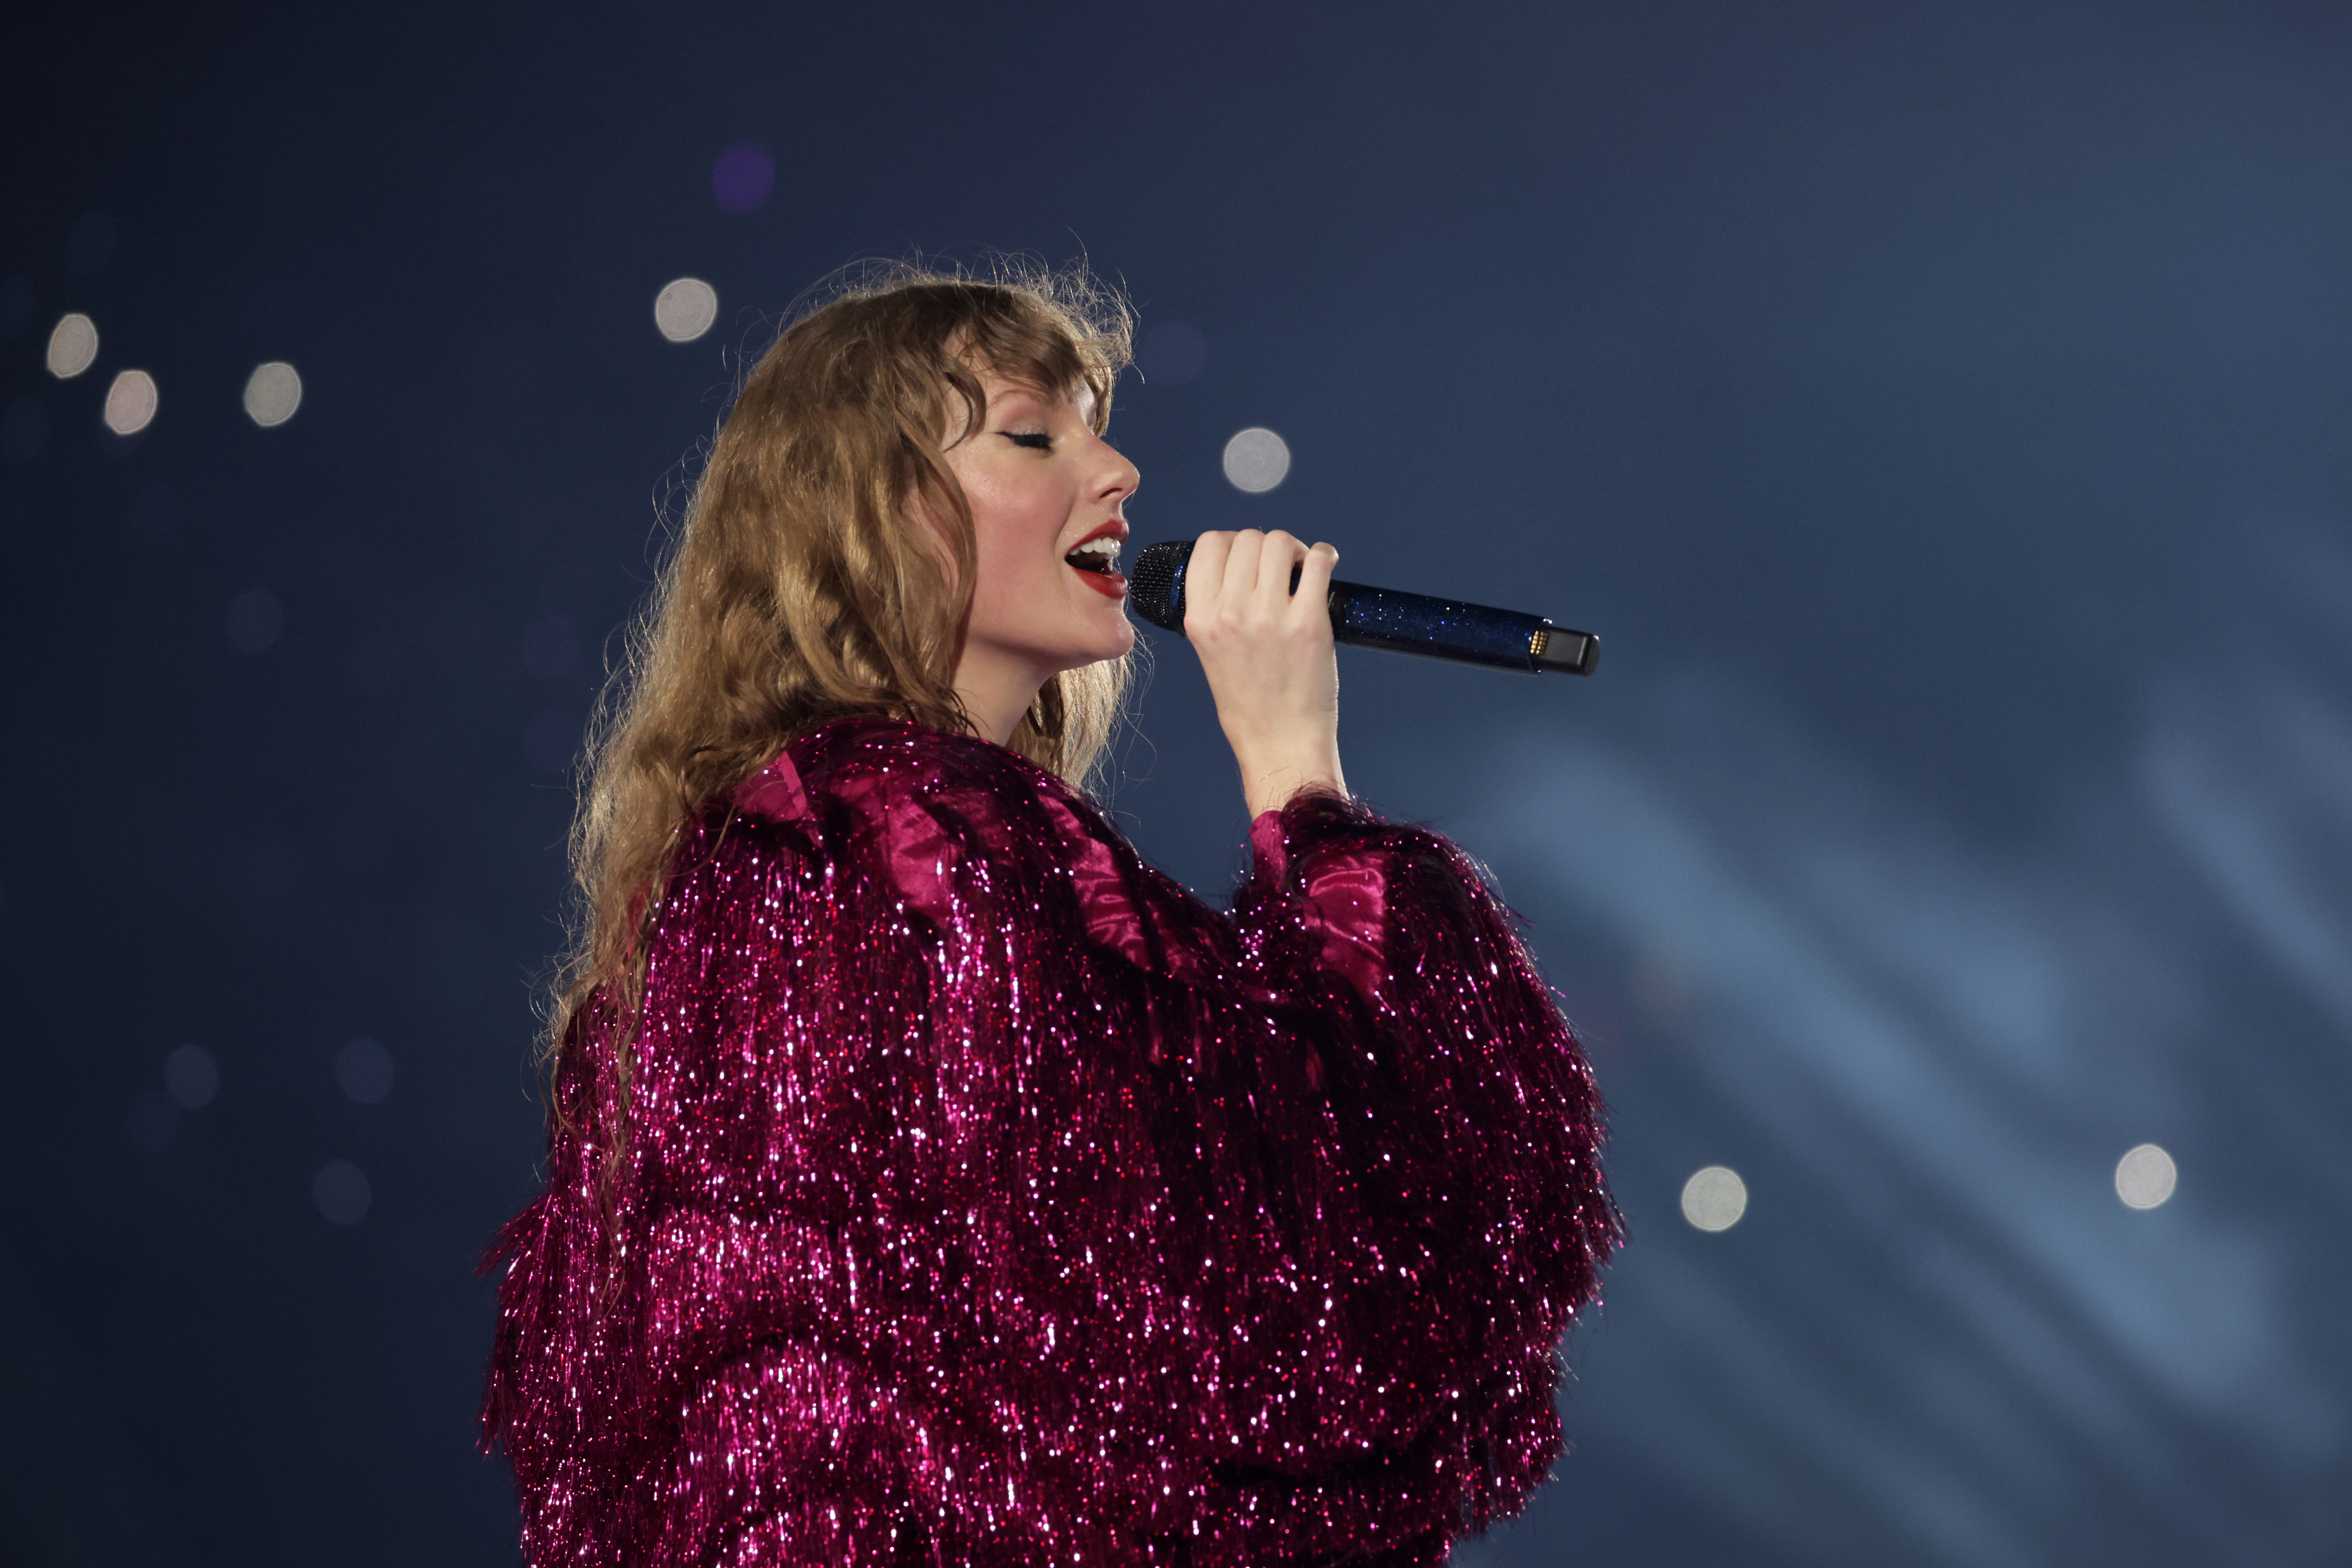 Taylor on stage singing into a microphone, wearing a sequined outfit